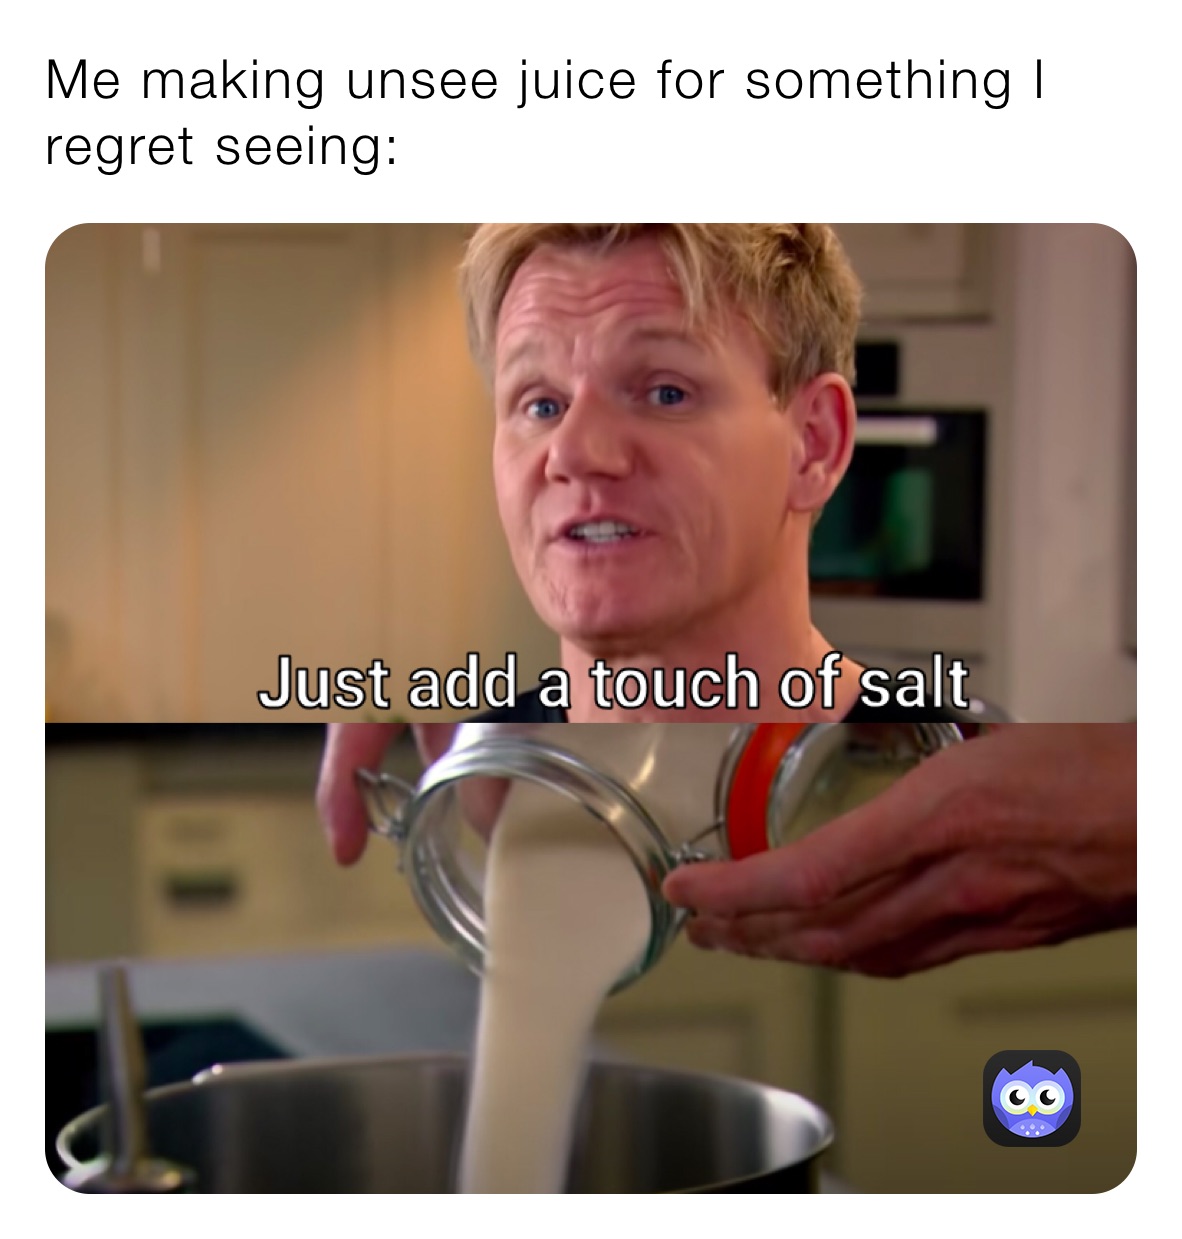 Me making unsee juice for something I regret seeing: